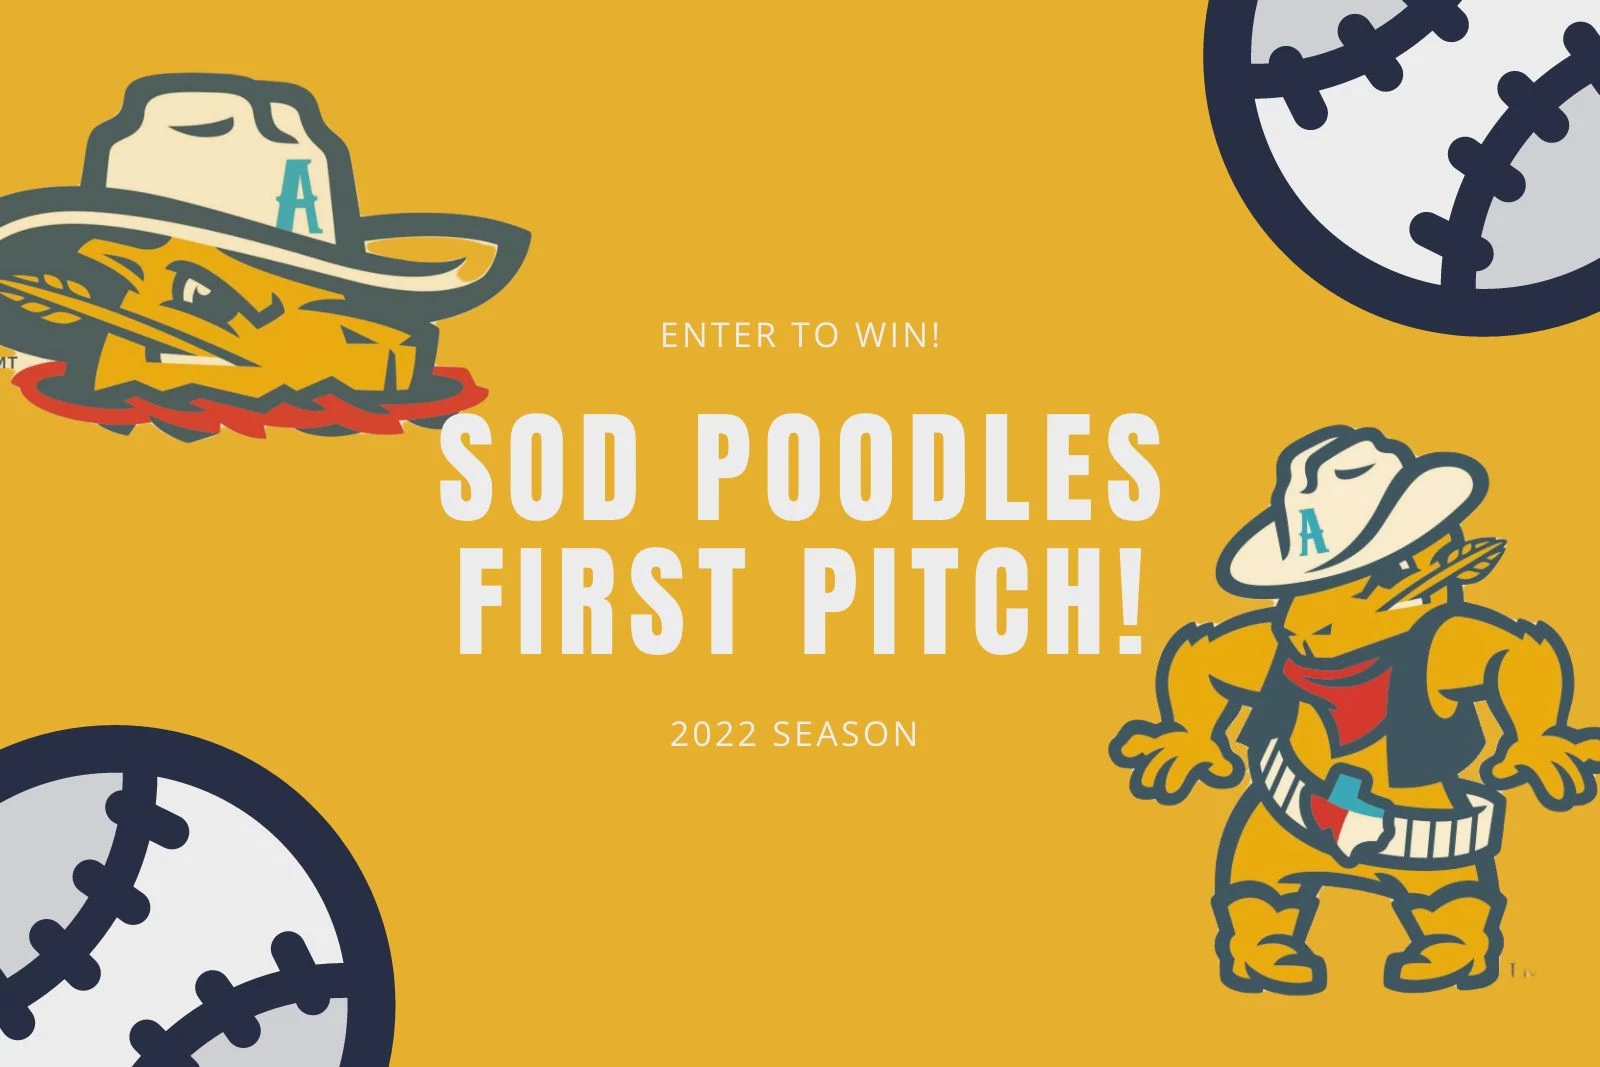 Enter to Win First Pitch at a Sod Poodles Game!